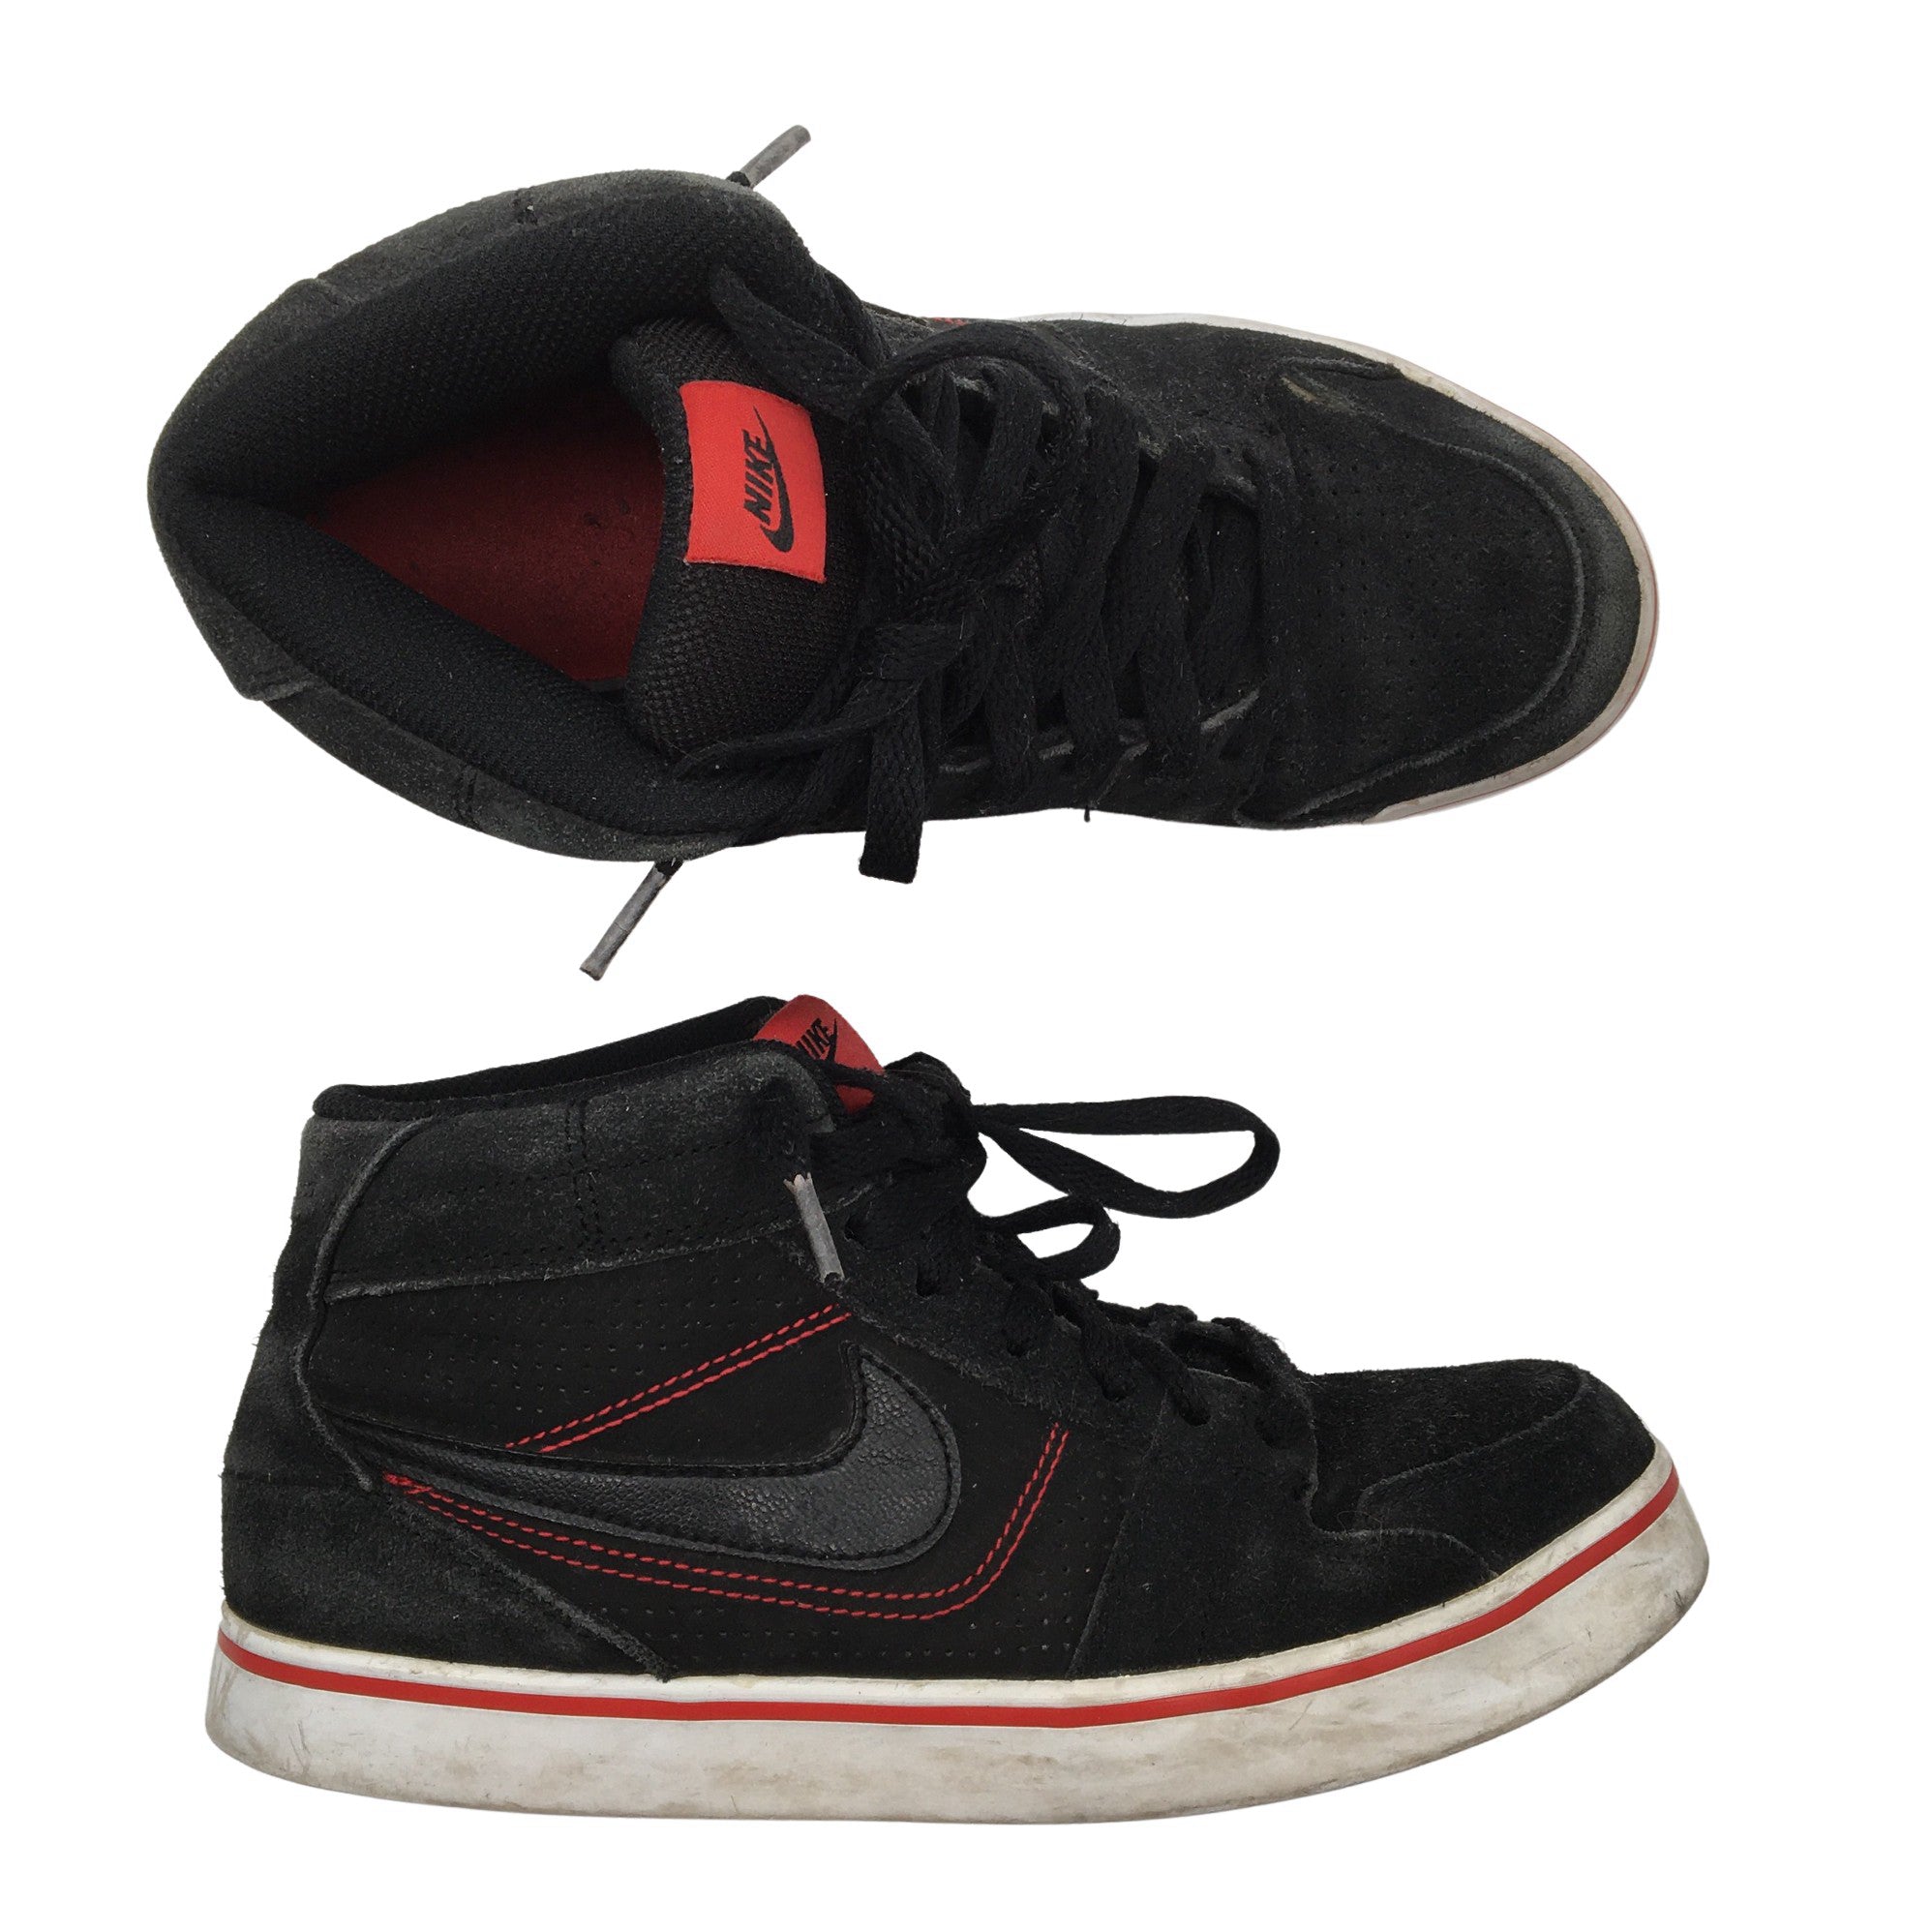 Nike Casual sneakers, size 38 (Black)